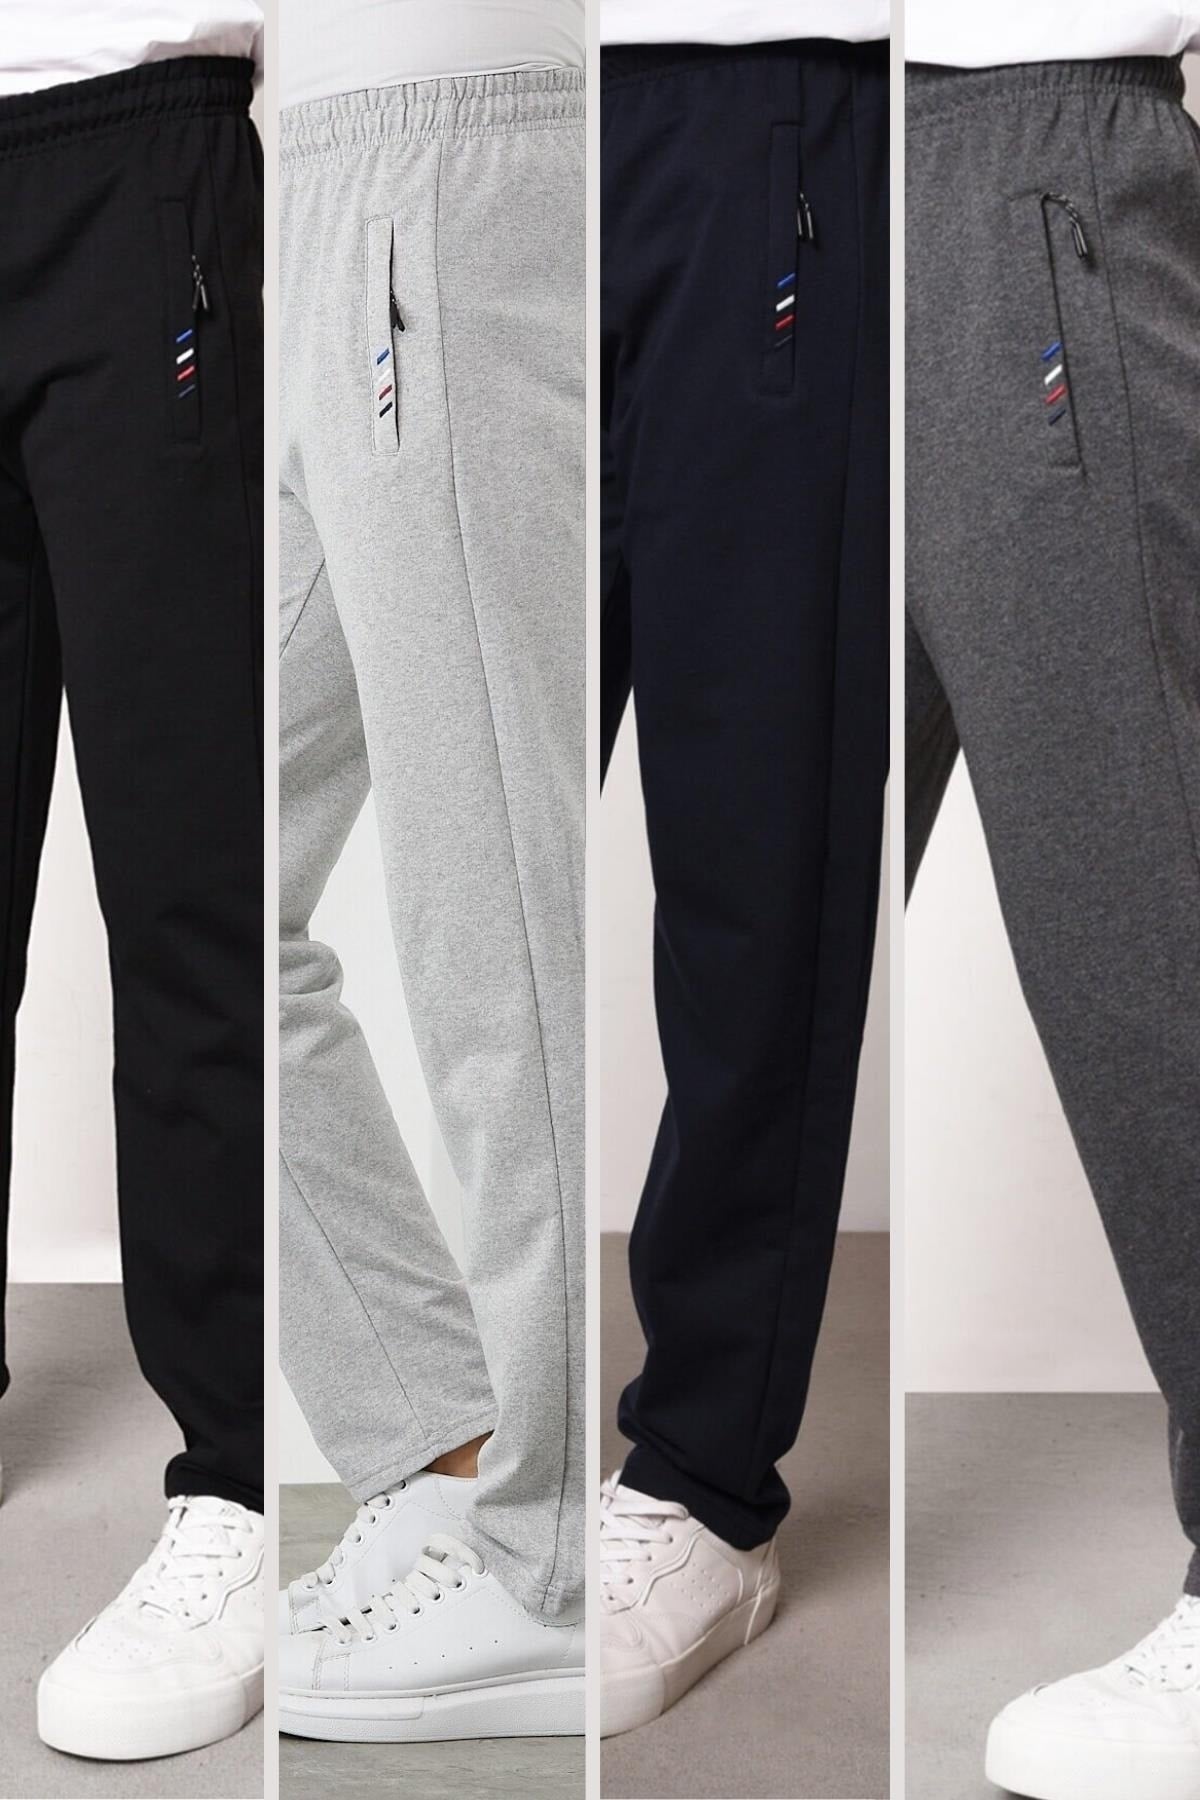 Multicolor Men's Zipper Pocket Embroidery Detailed Straight Leg Casual Fit 4-Pack of Sweatpants